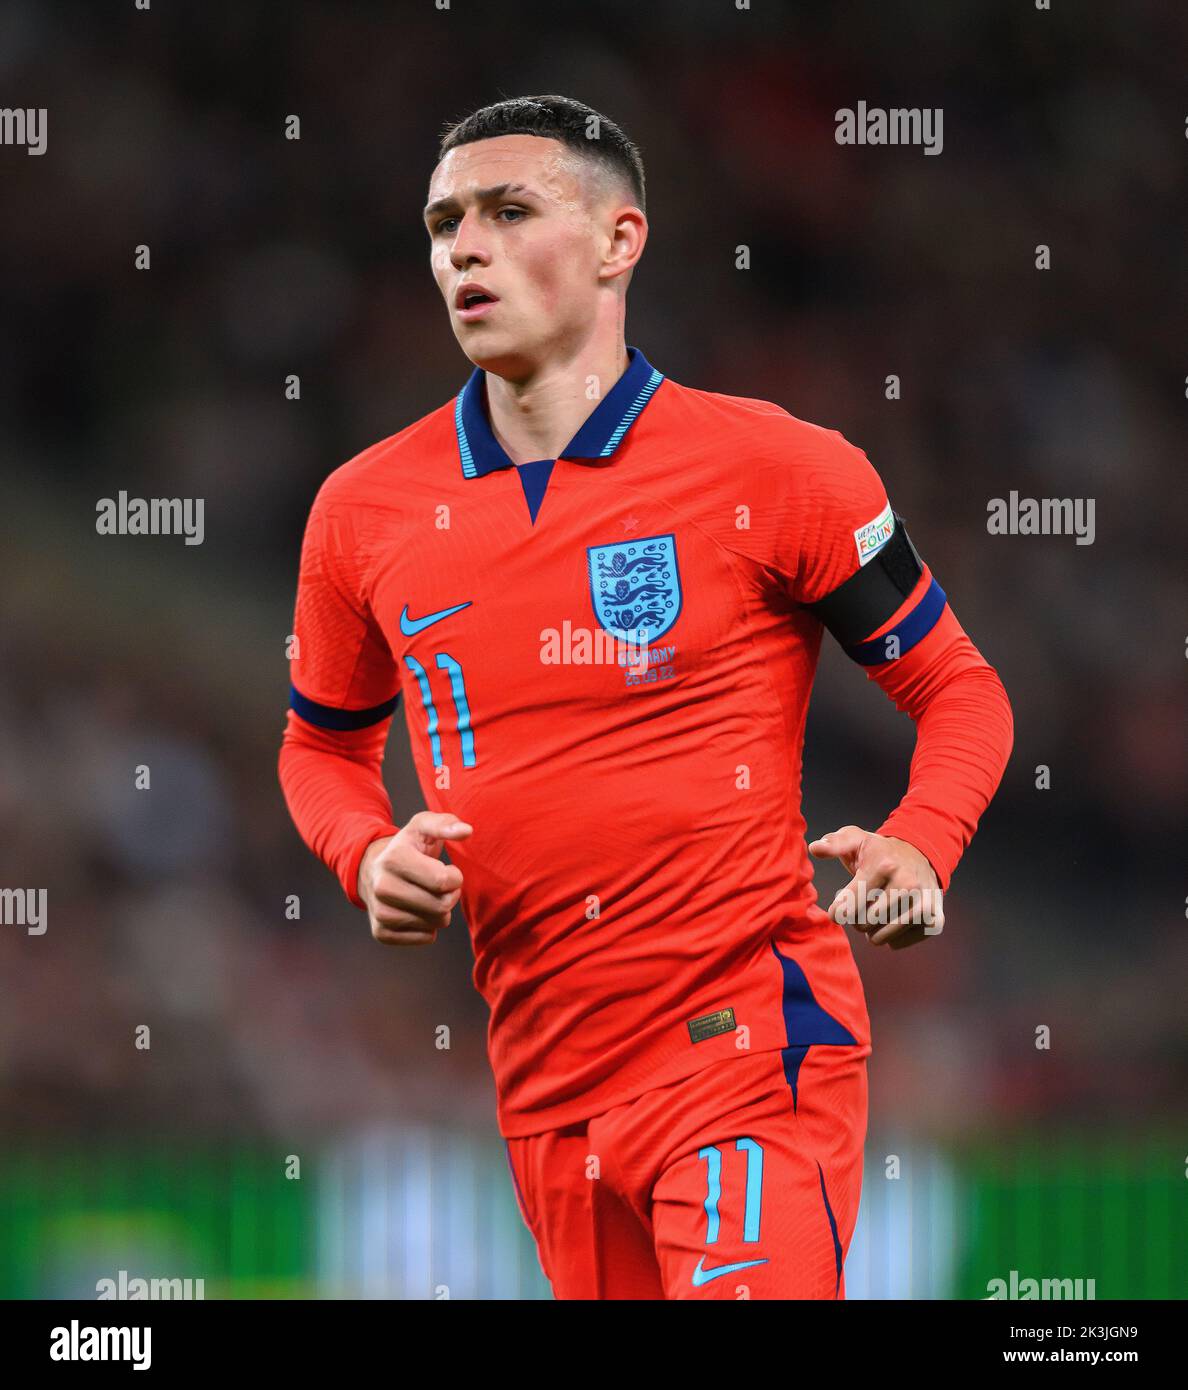 26 Sep 2022 - England v Germany - UEFA Nations League - League A - Group 3 - Wembley Stadium  England's Phil Foden during the UEFA Nations League match against Germany. Picture : Mark Pain / Alamy Live News Stock Photo